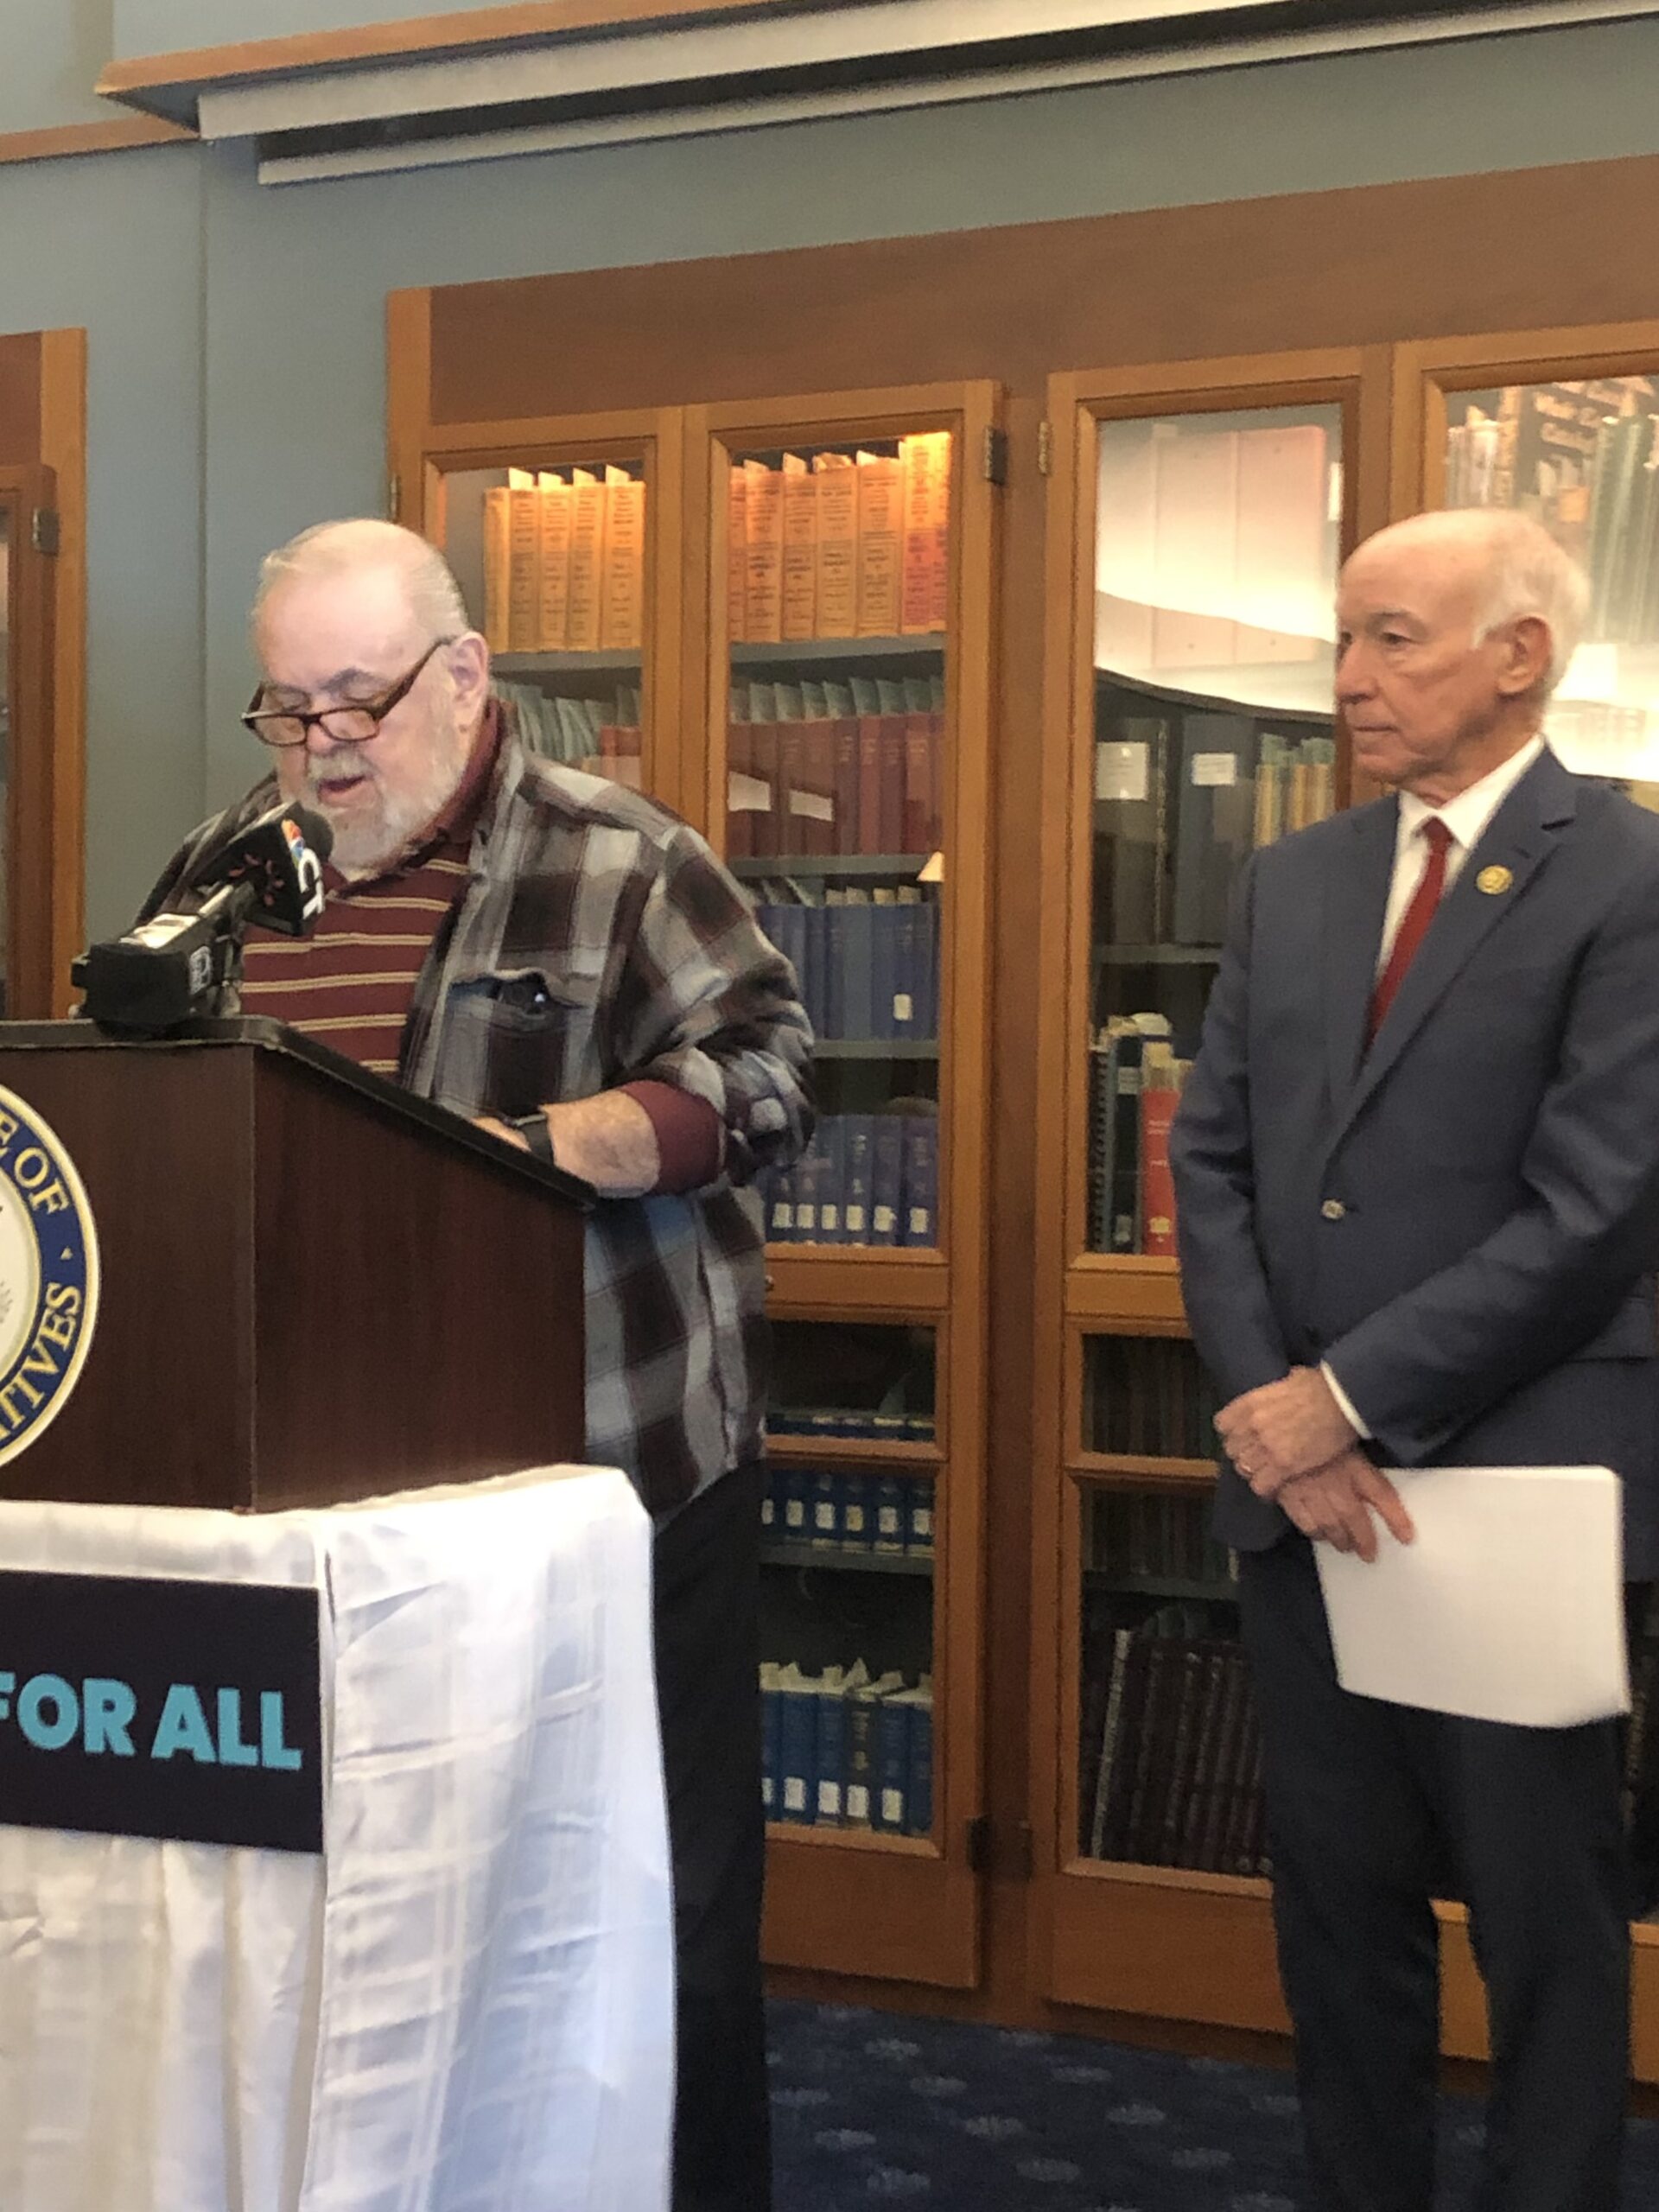 AHEPA Senior Living Residents Advocate for the Affordable Connectivity Program